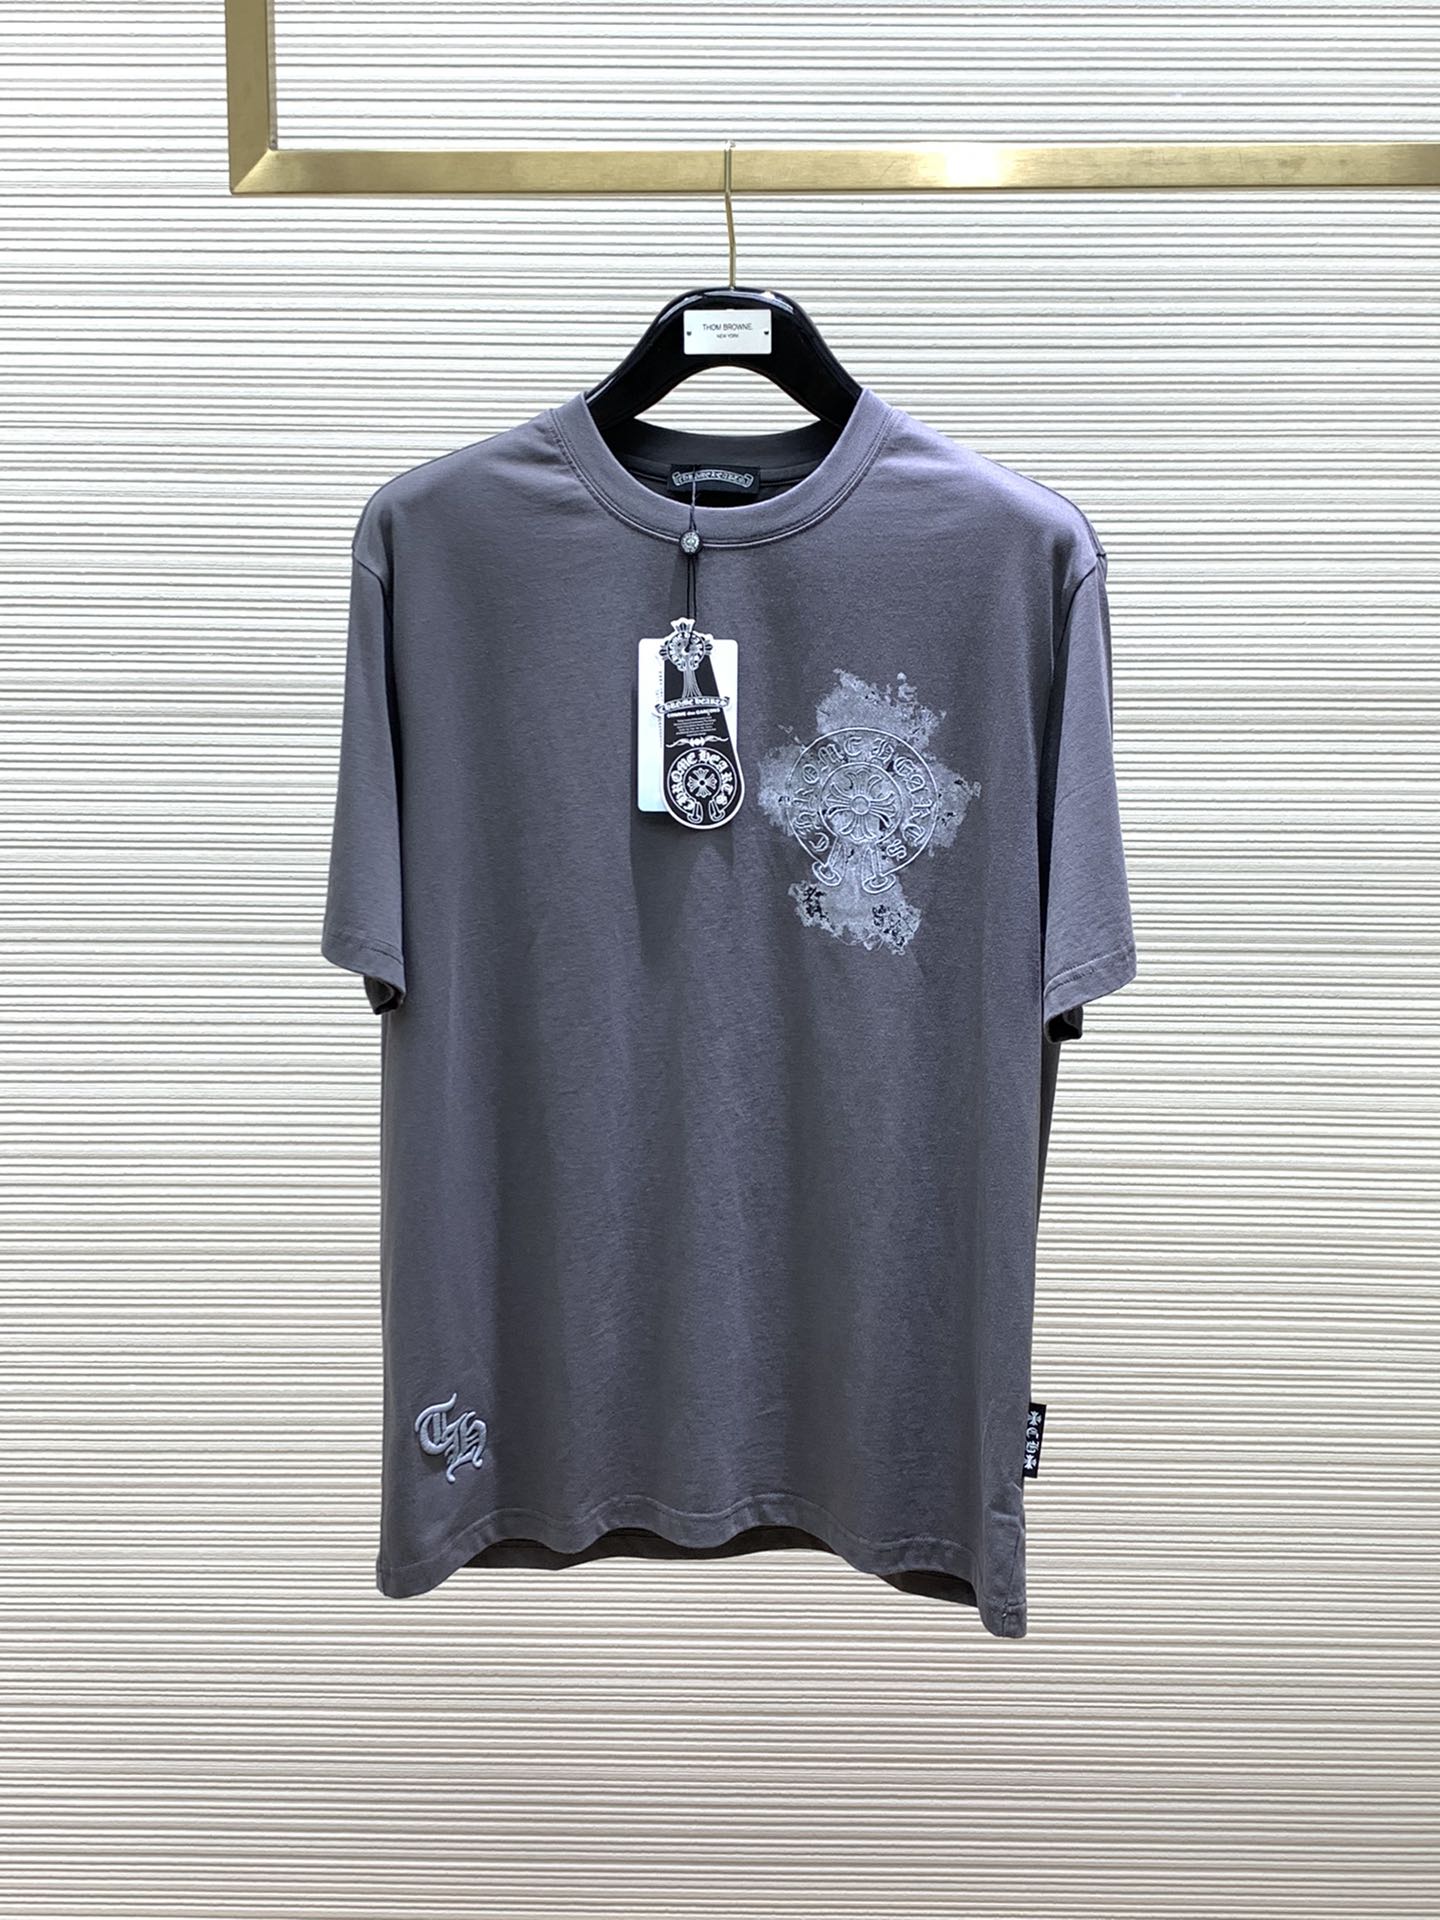 Brand Designer Replica
 Chrome Hearts Clothing T-Shirt Embroidery Summer Collection Fashion Short Sleeve